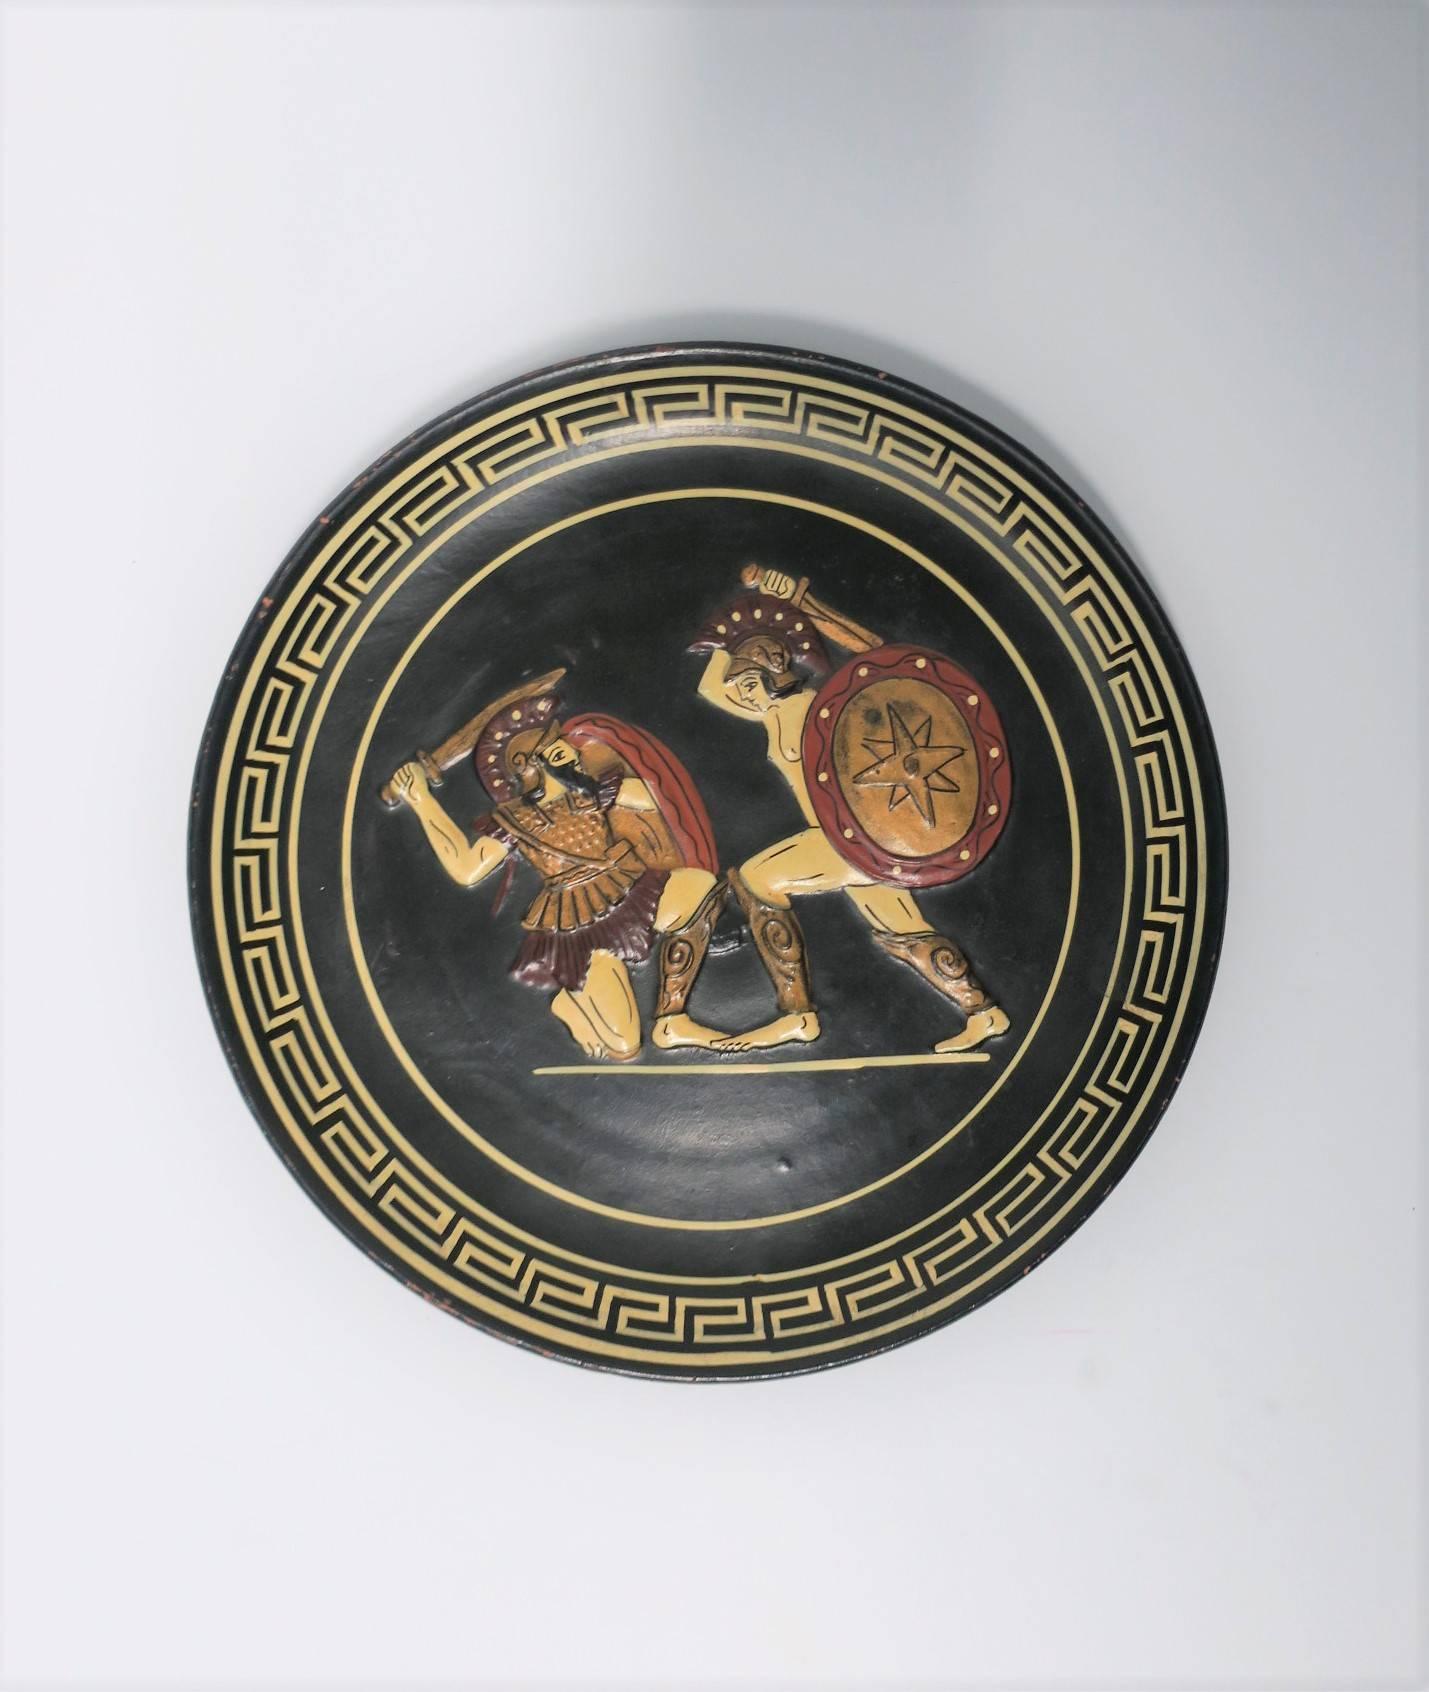 A vintage Greek wall or decorative plate with raised relief scene depicting Achilles fighting against Hector. Handmade in Greece, and numbered as No. 502, as marked on back.

Plate measures: .75 in. H x 8.25 in. Diameter

